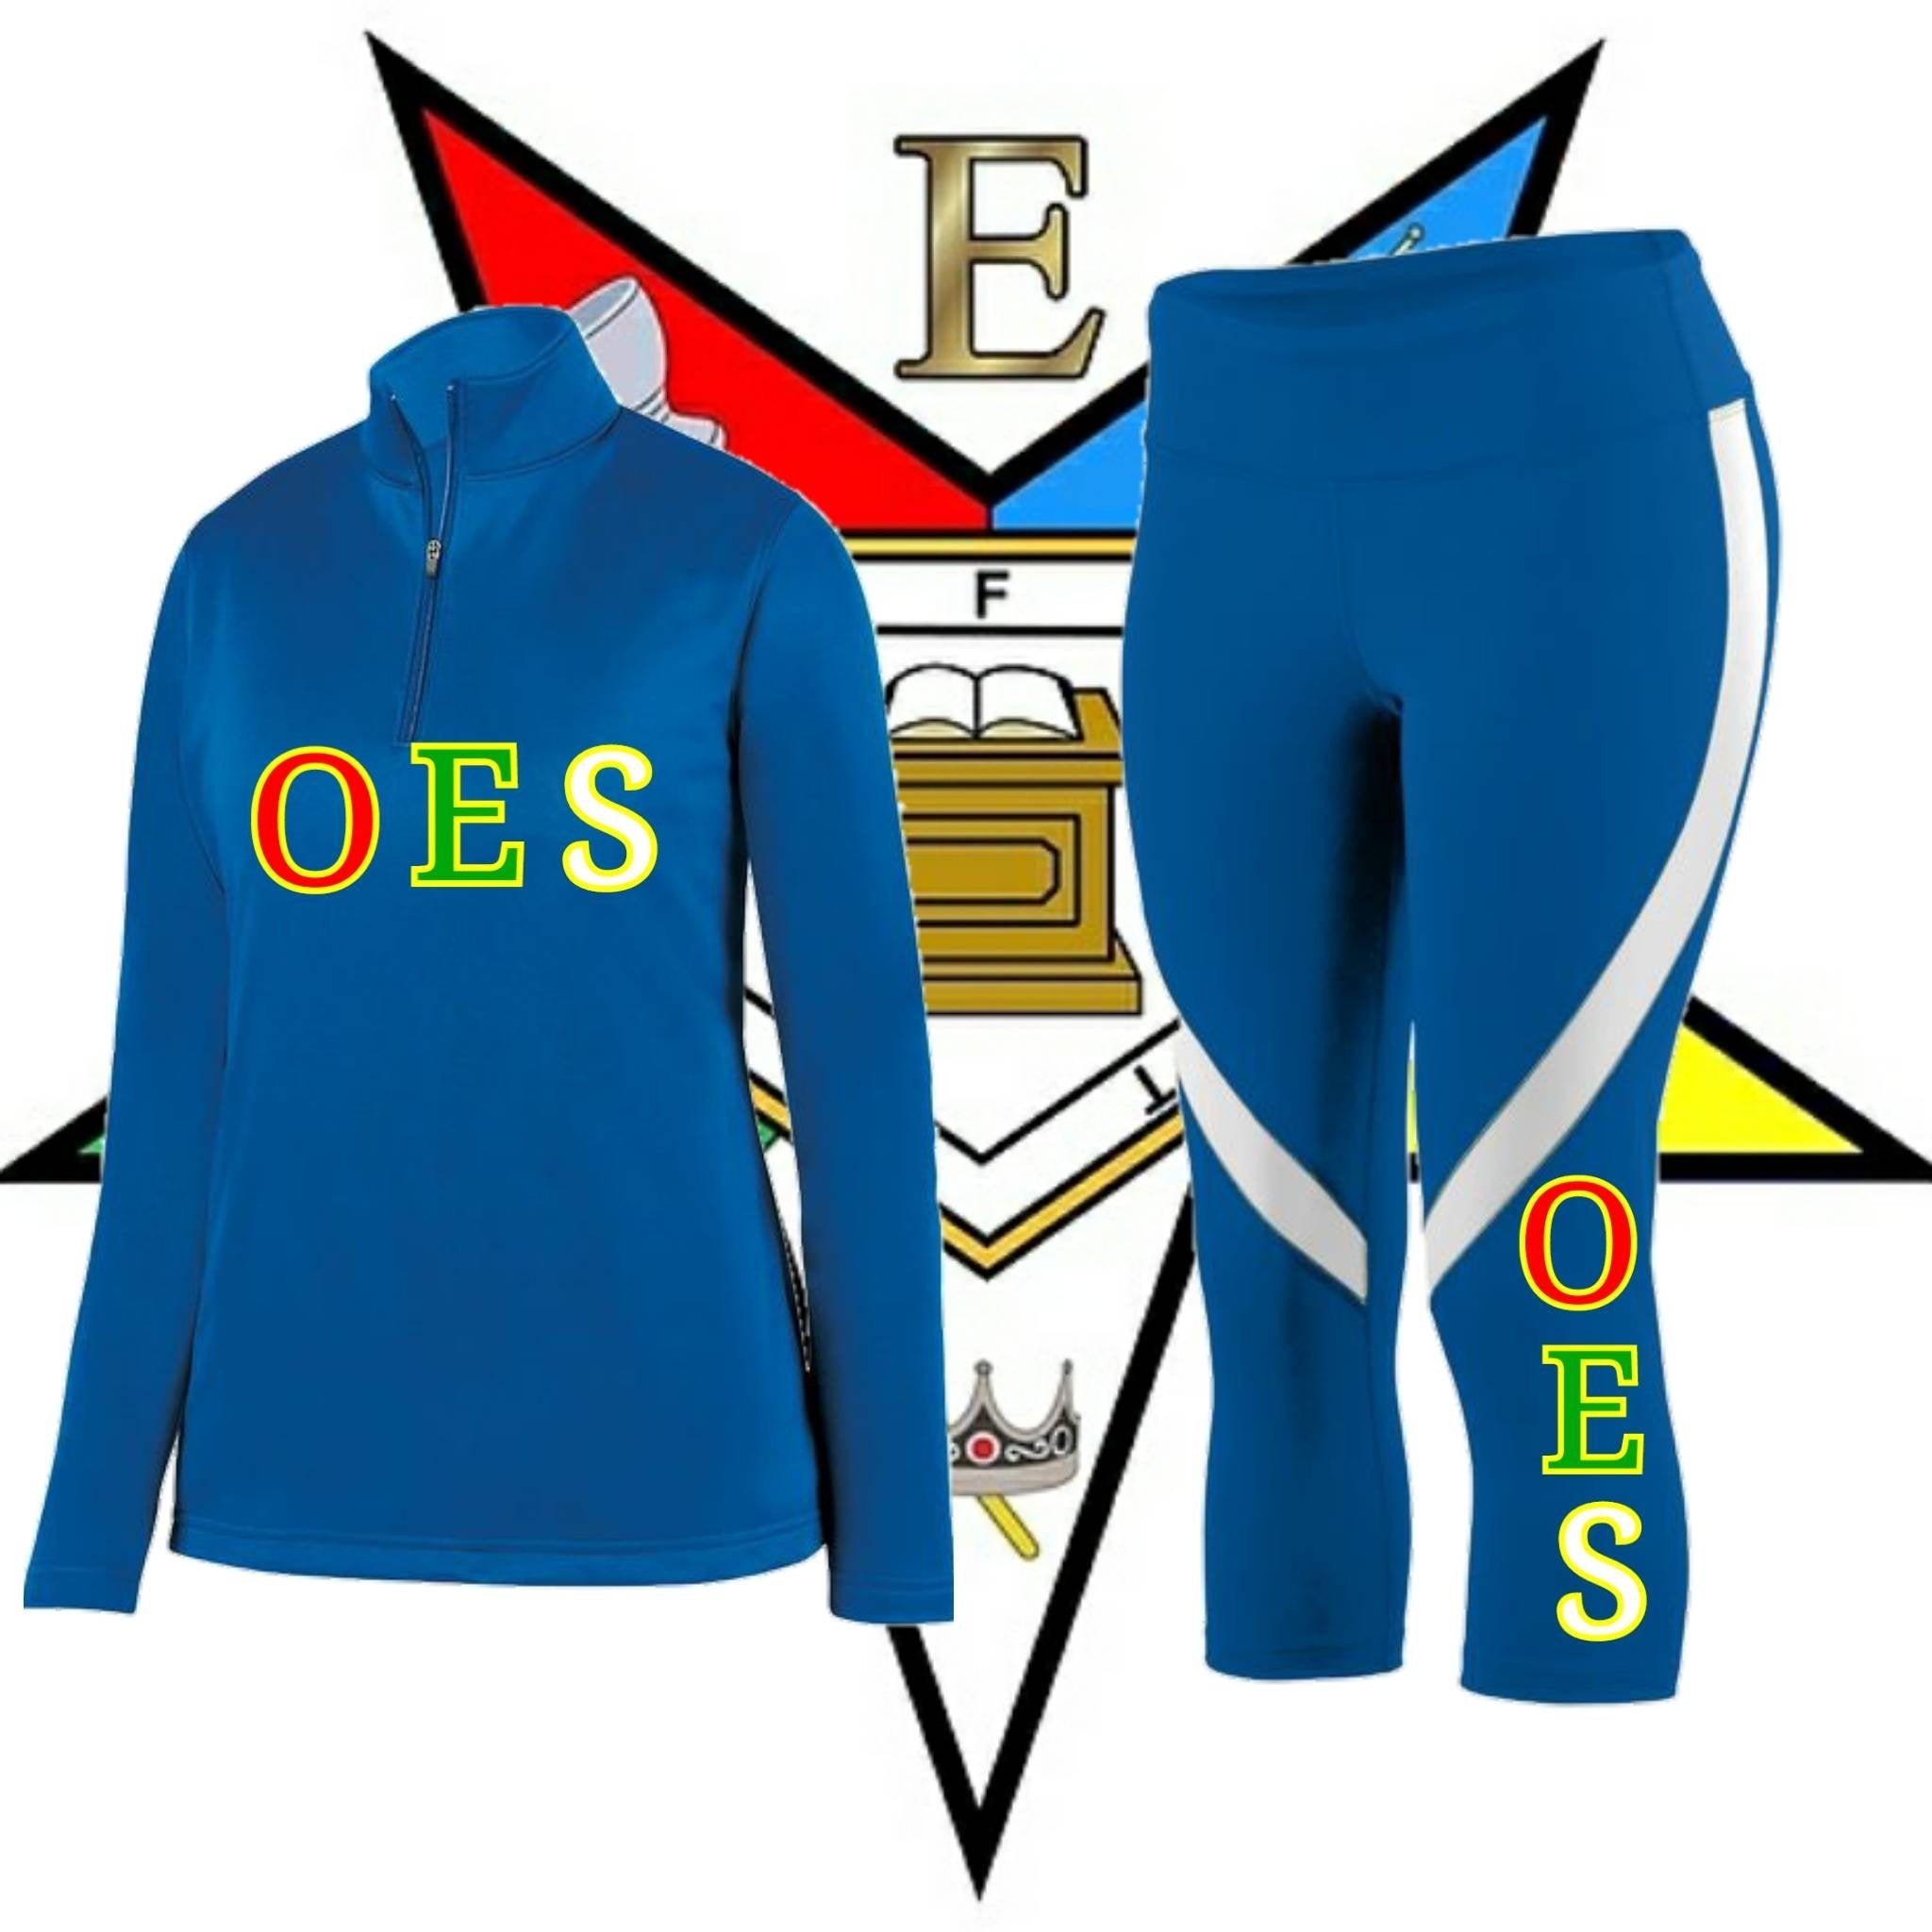 OES dryfit fitness set